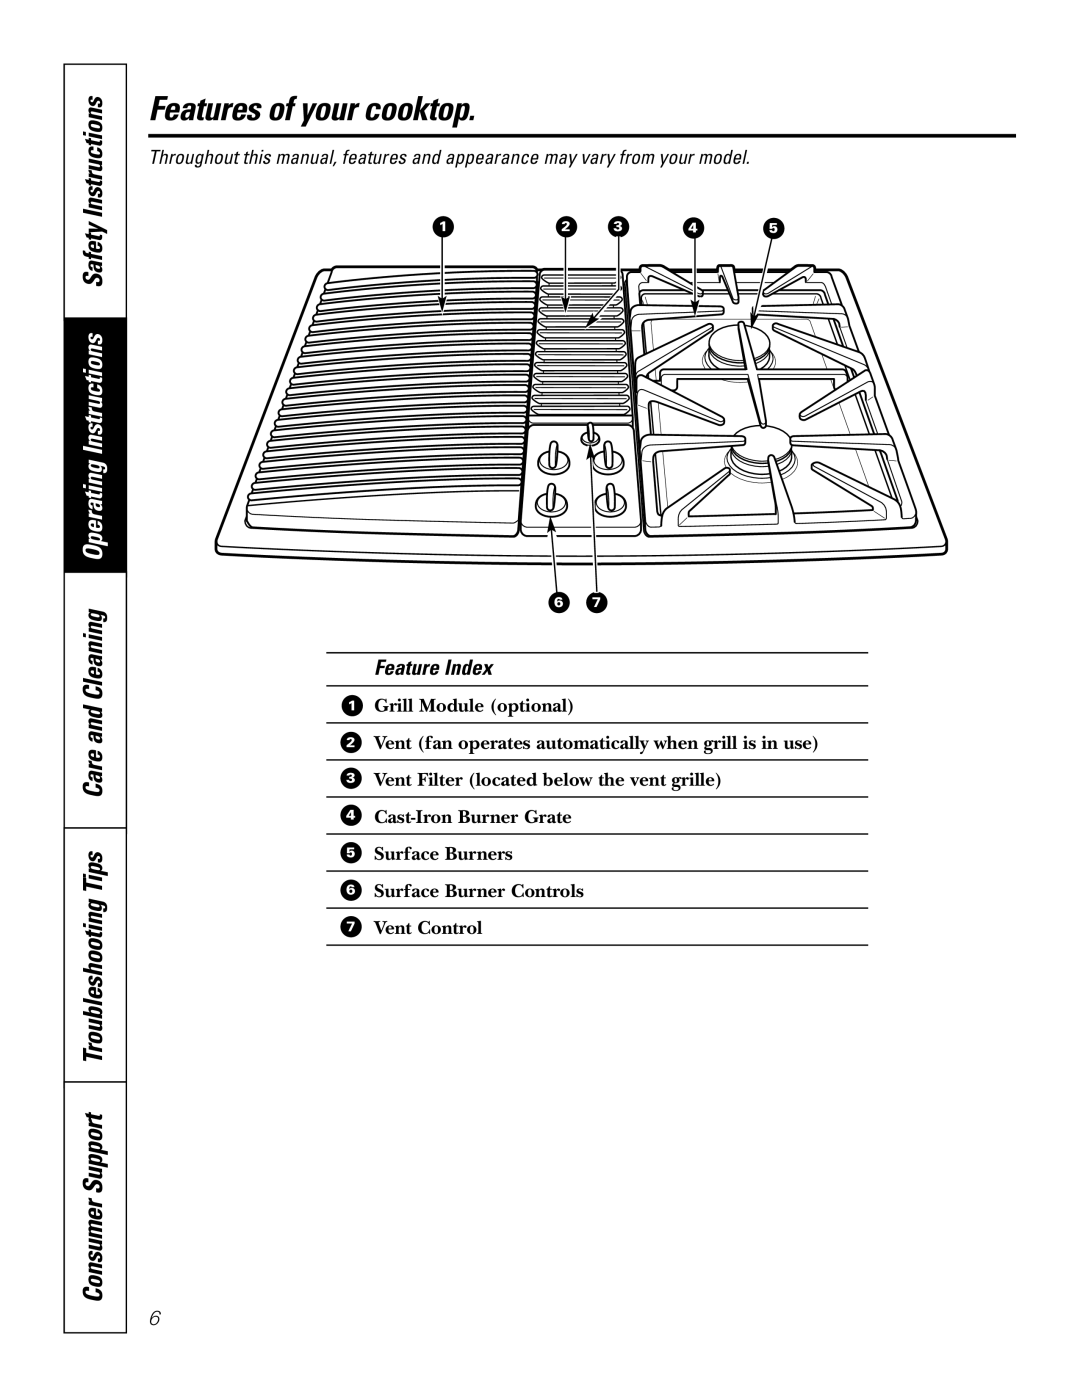 GE JGP990 manual Features of your cooktop, Feature Index 